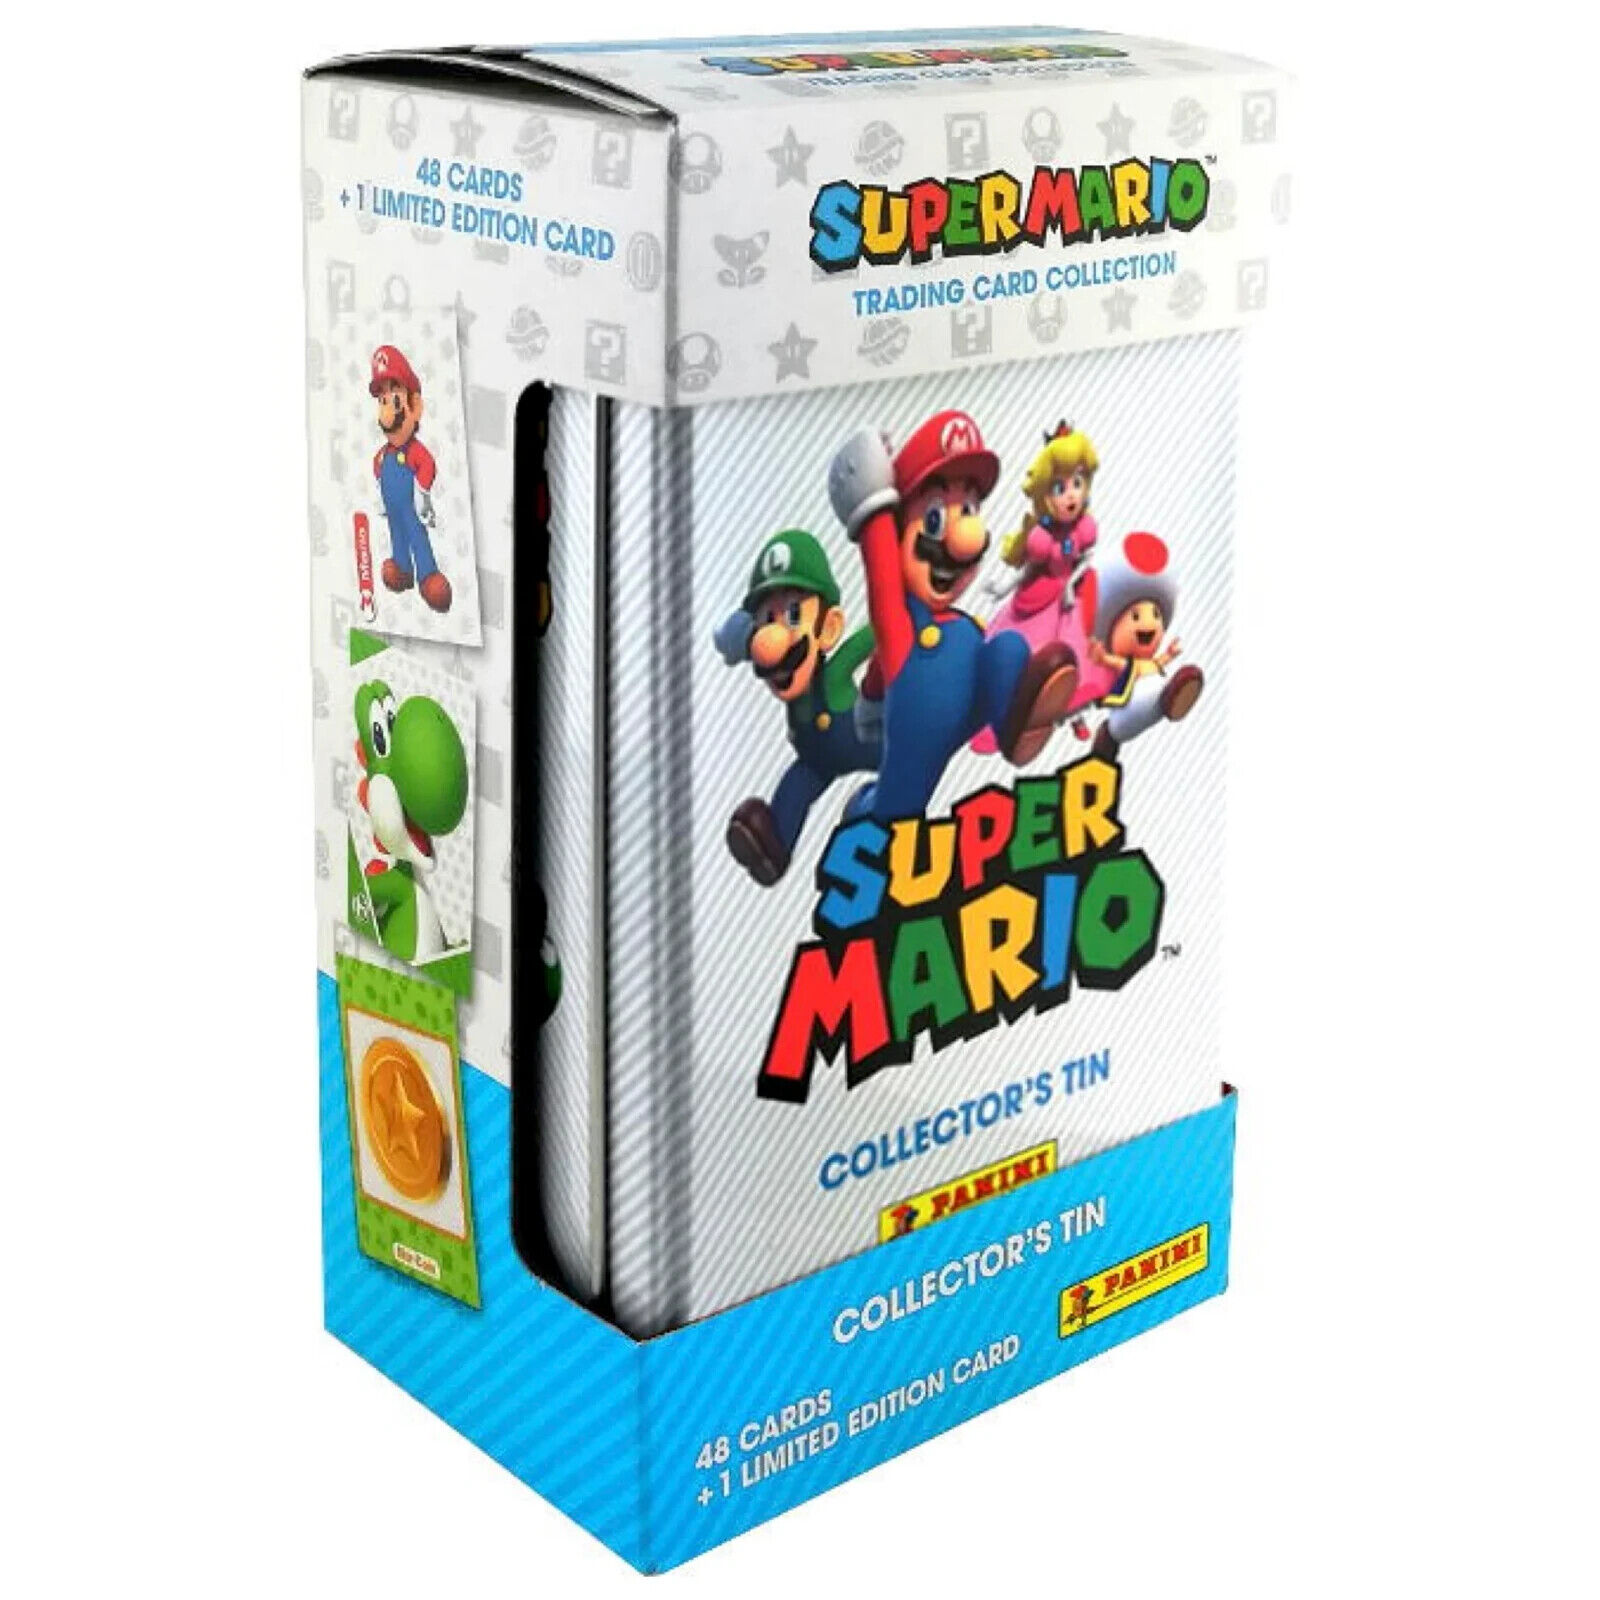 2022 Panini Super Mario White Collector's Tin | 6 Packs | 48 Cards + 1 LE Card